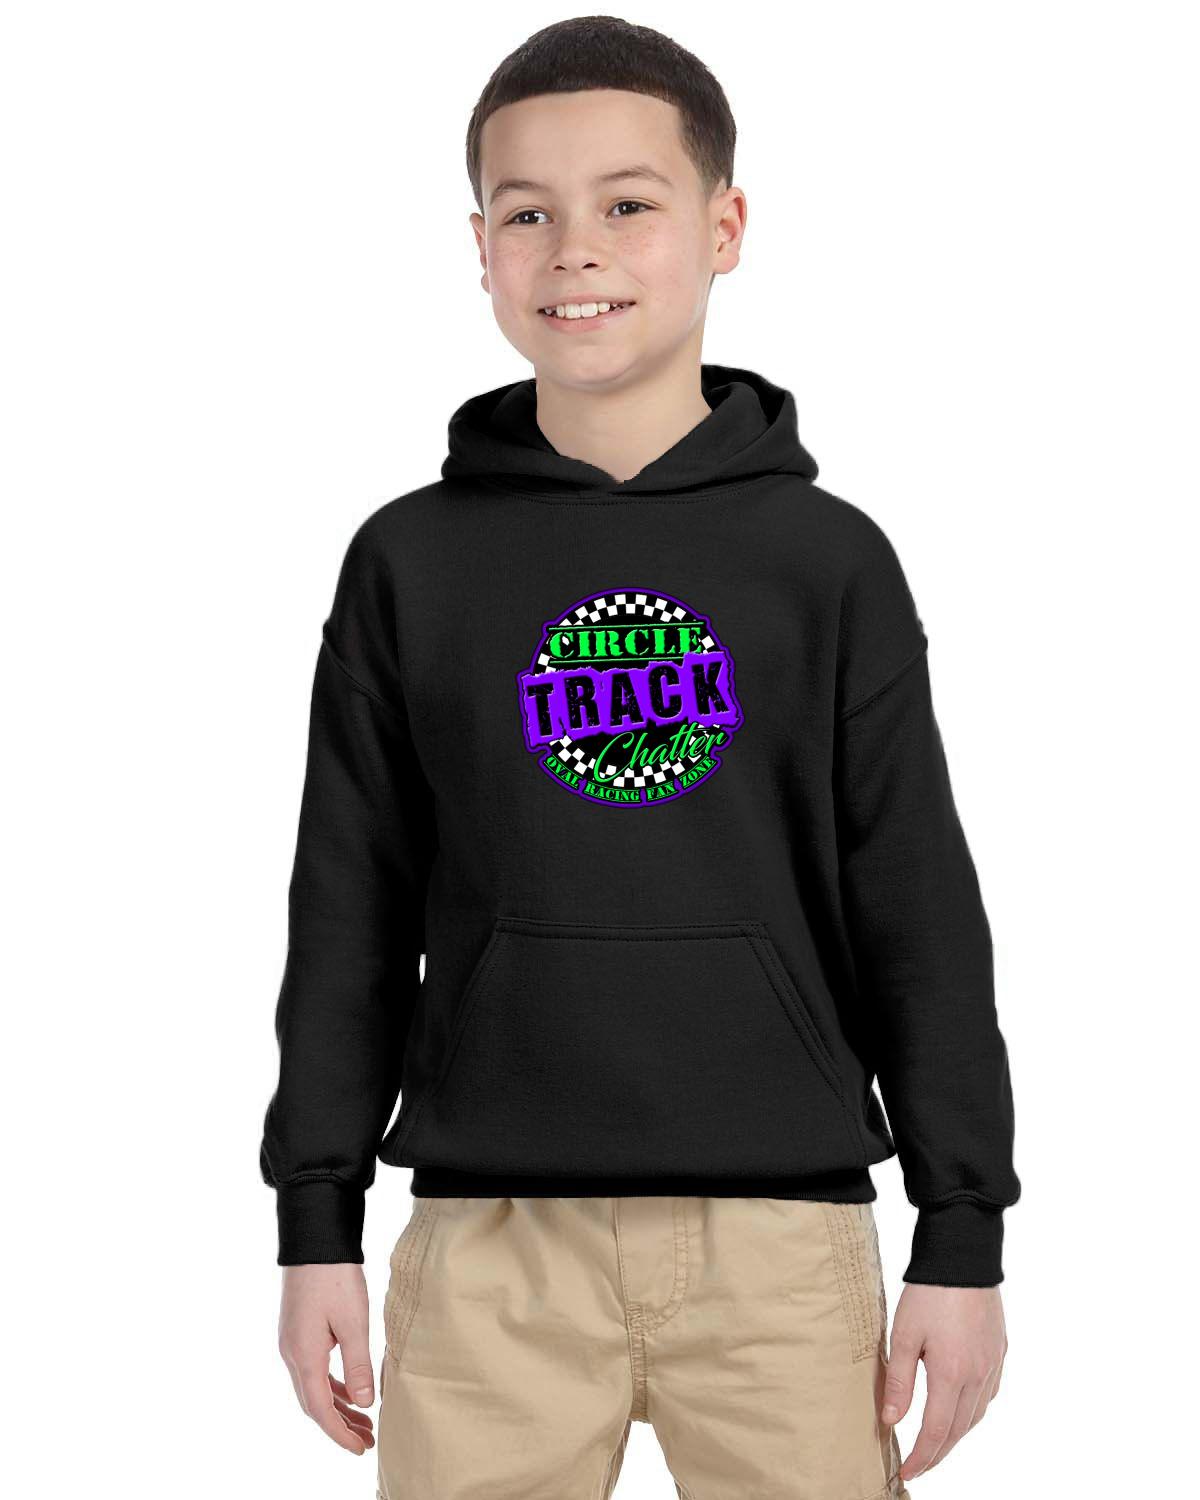 Circle Track Chatter Youth Hoodie